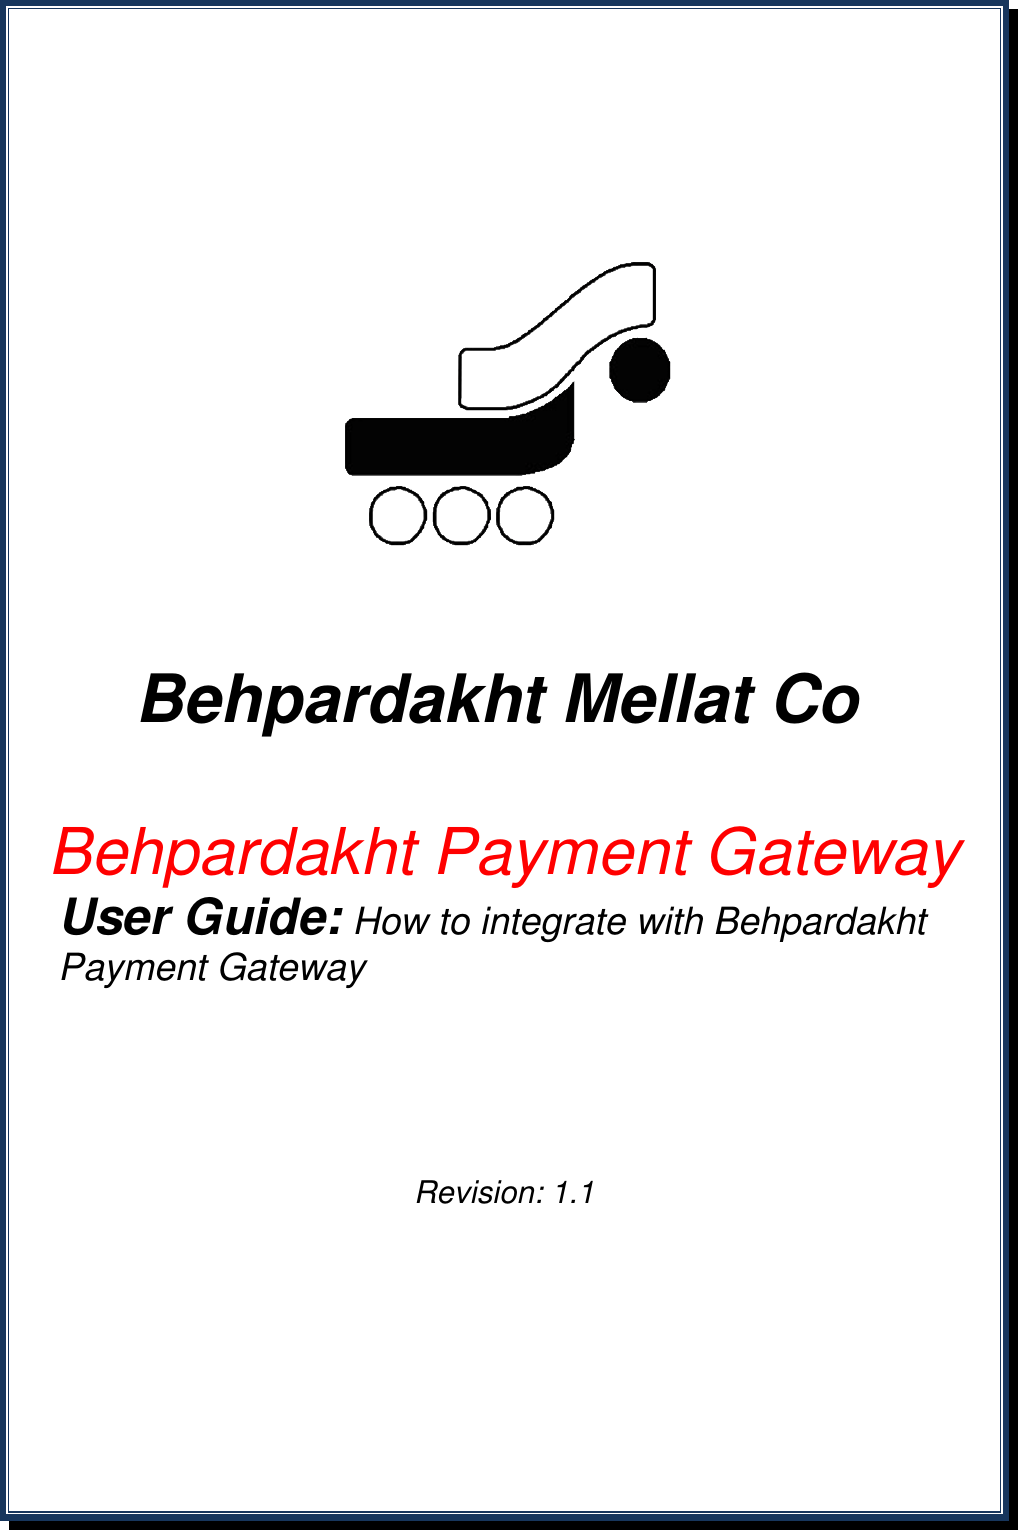 Page 1 of 11 - Behpardakht Mellat - Payment Gateway PGW User Manual English Ver 1.1